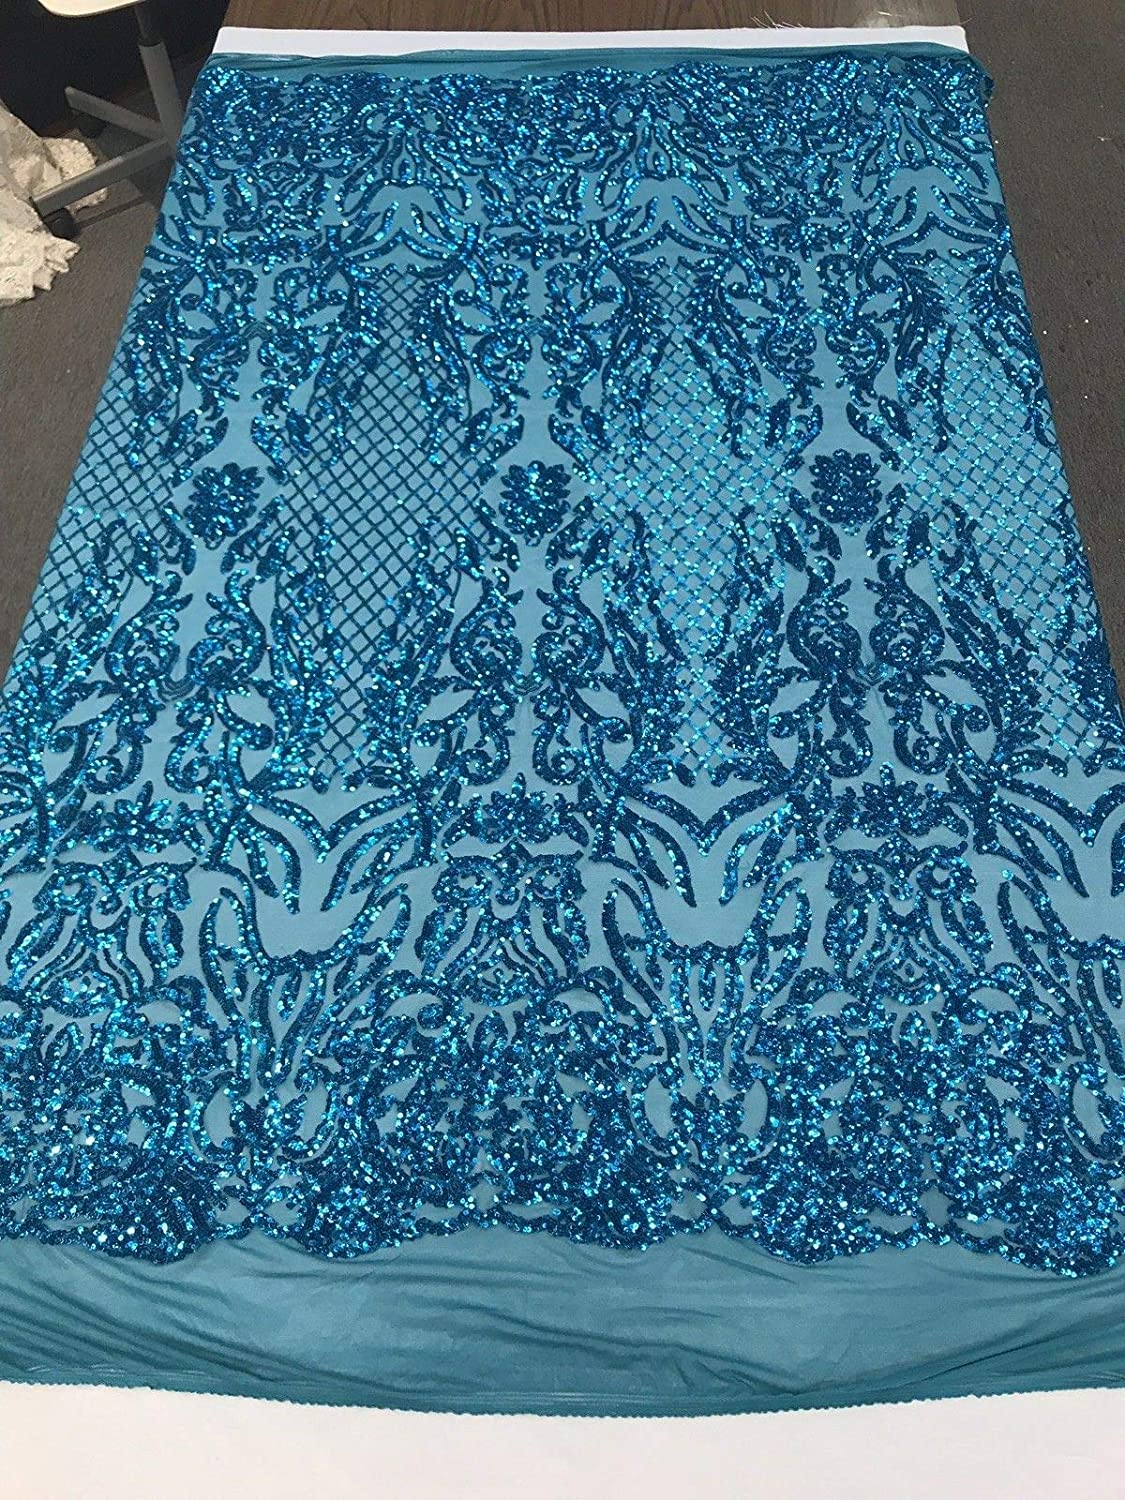 TURQUOISE SHINY SEQUIN DAMASK DESIGN EMBROIDERY ON A 4 WAY STRETCH MESH-1 YARD.